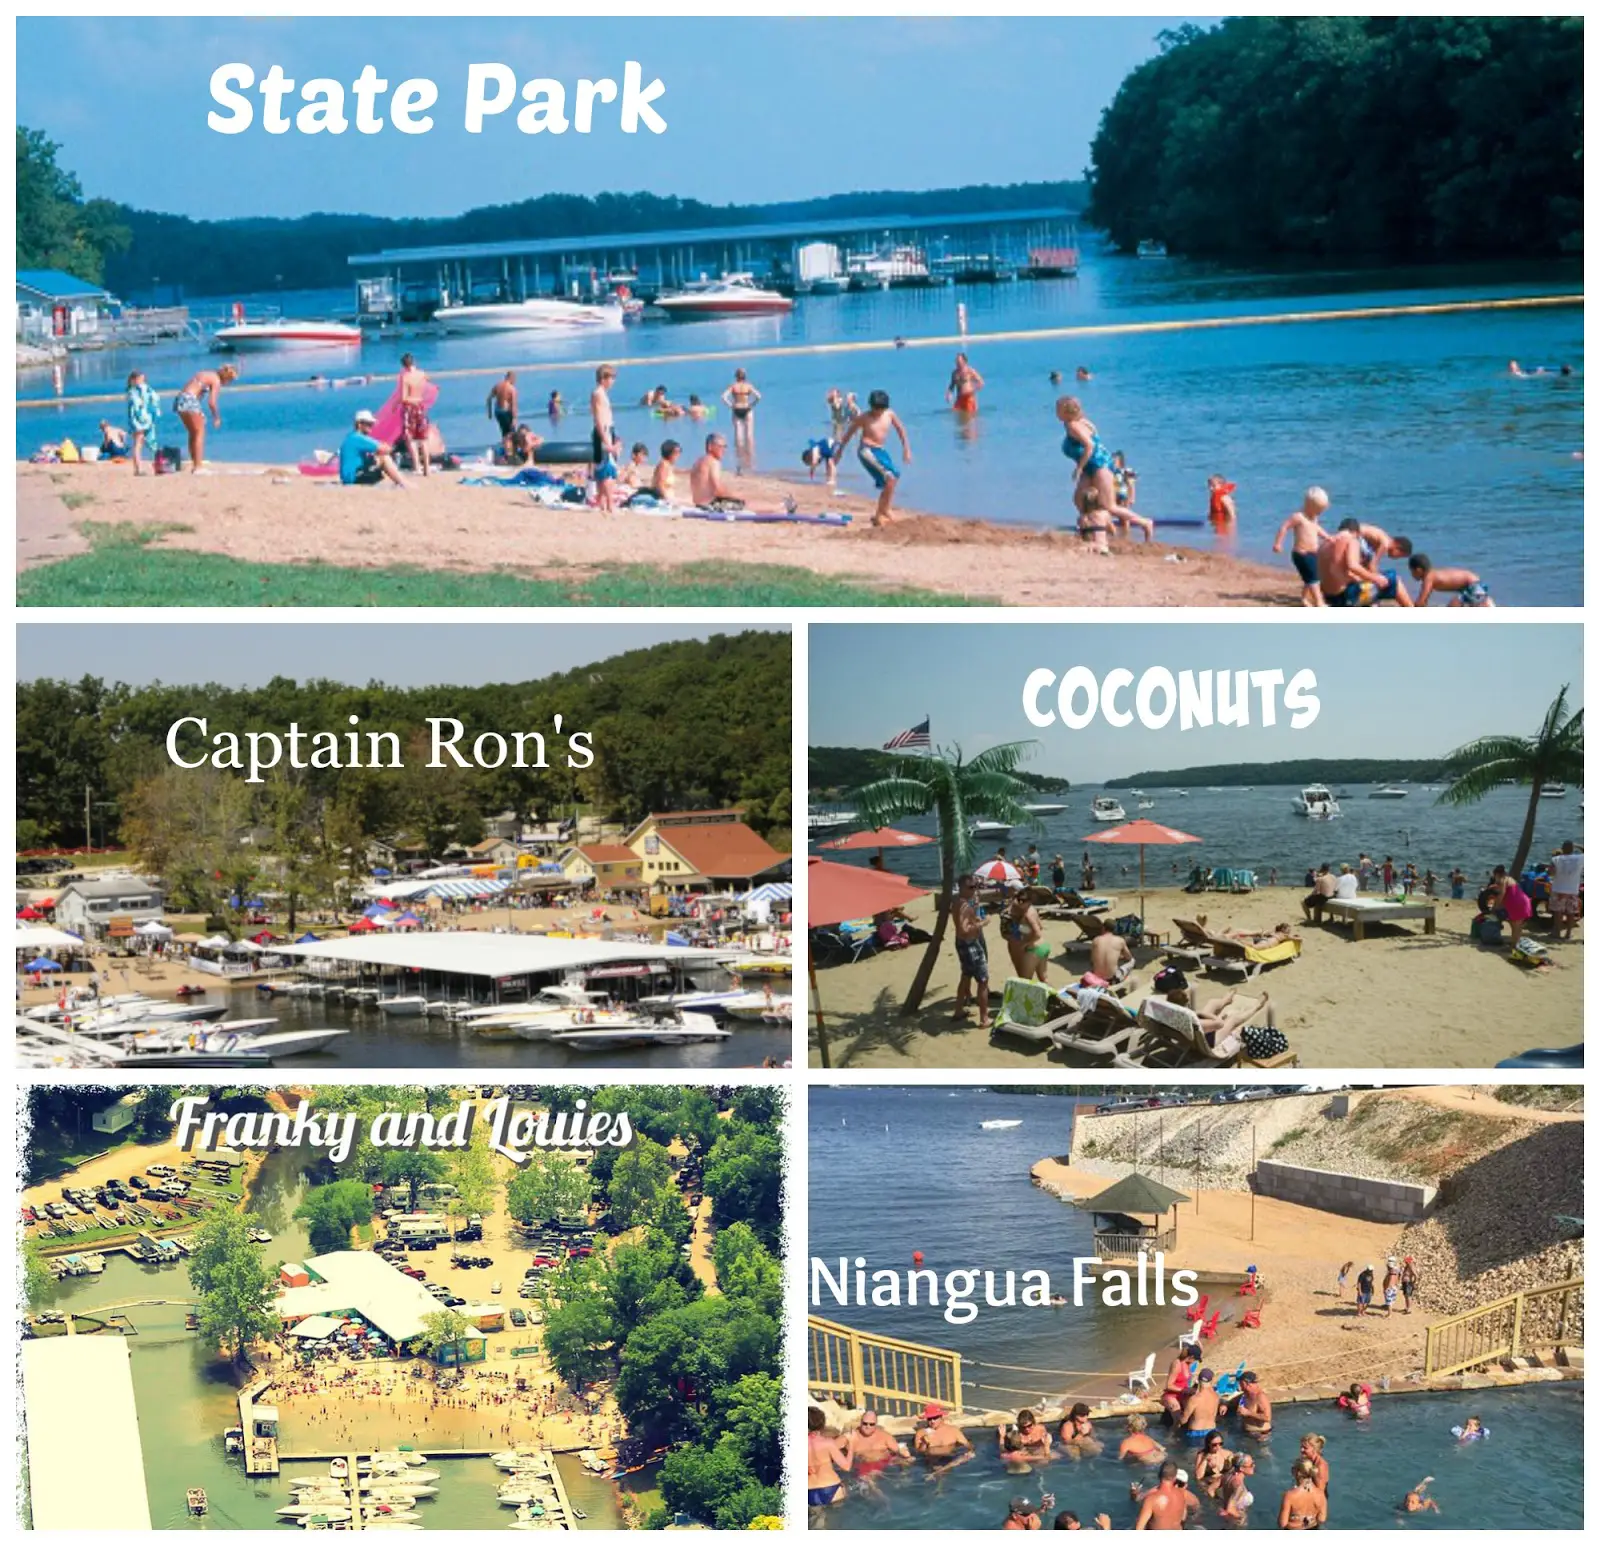 BomBay Boat Rental: Hit the Beach at the Lake of the Ozarks